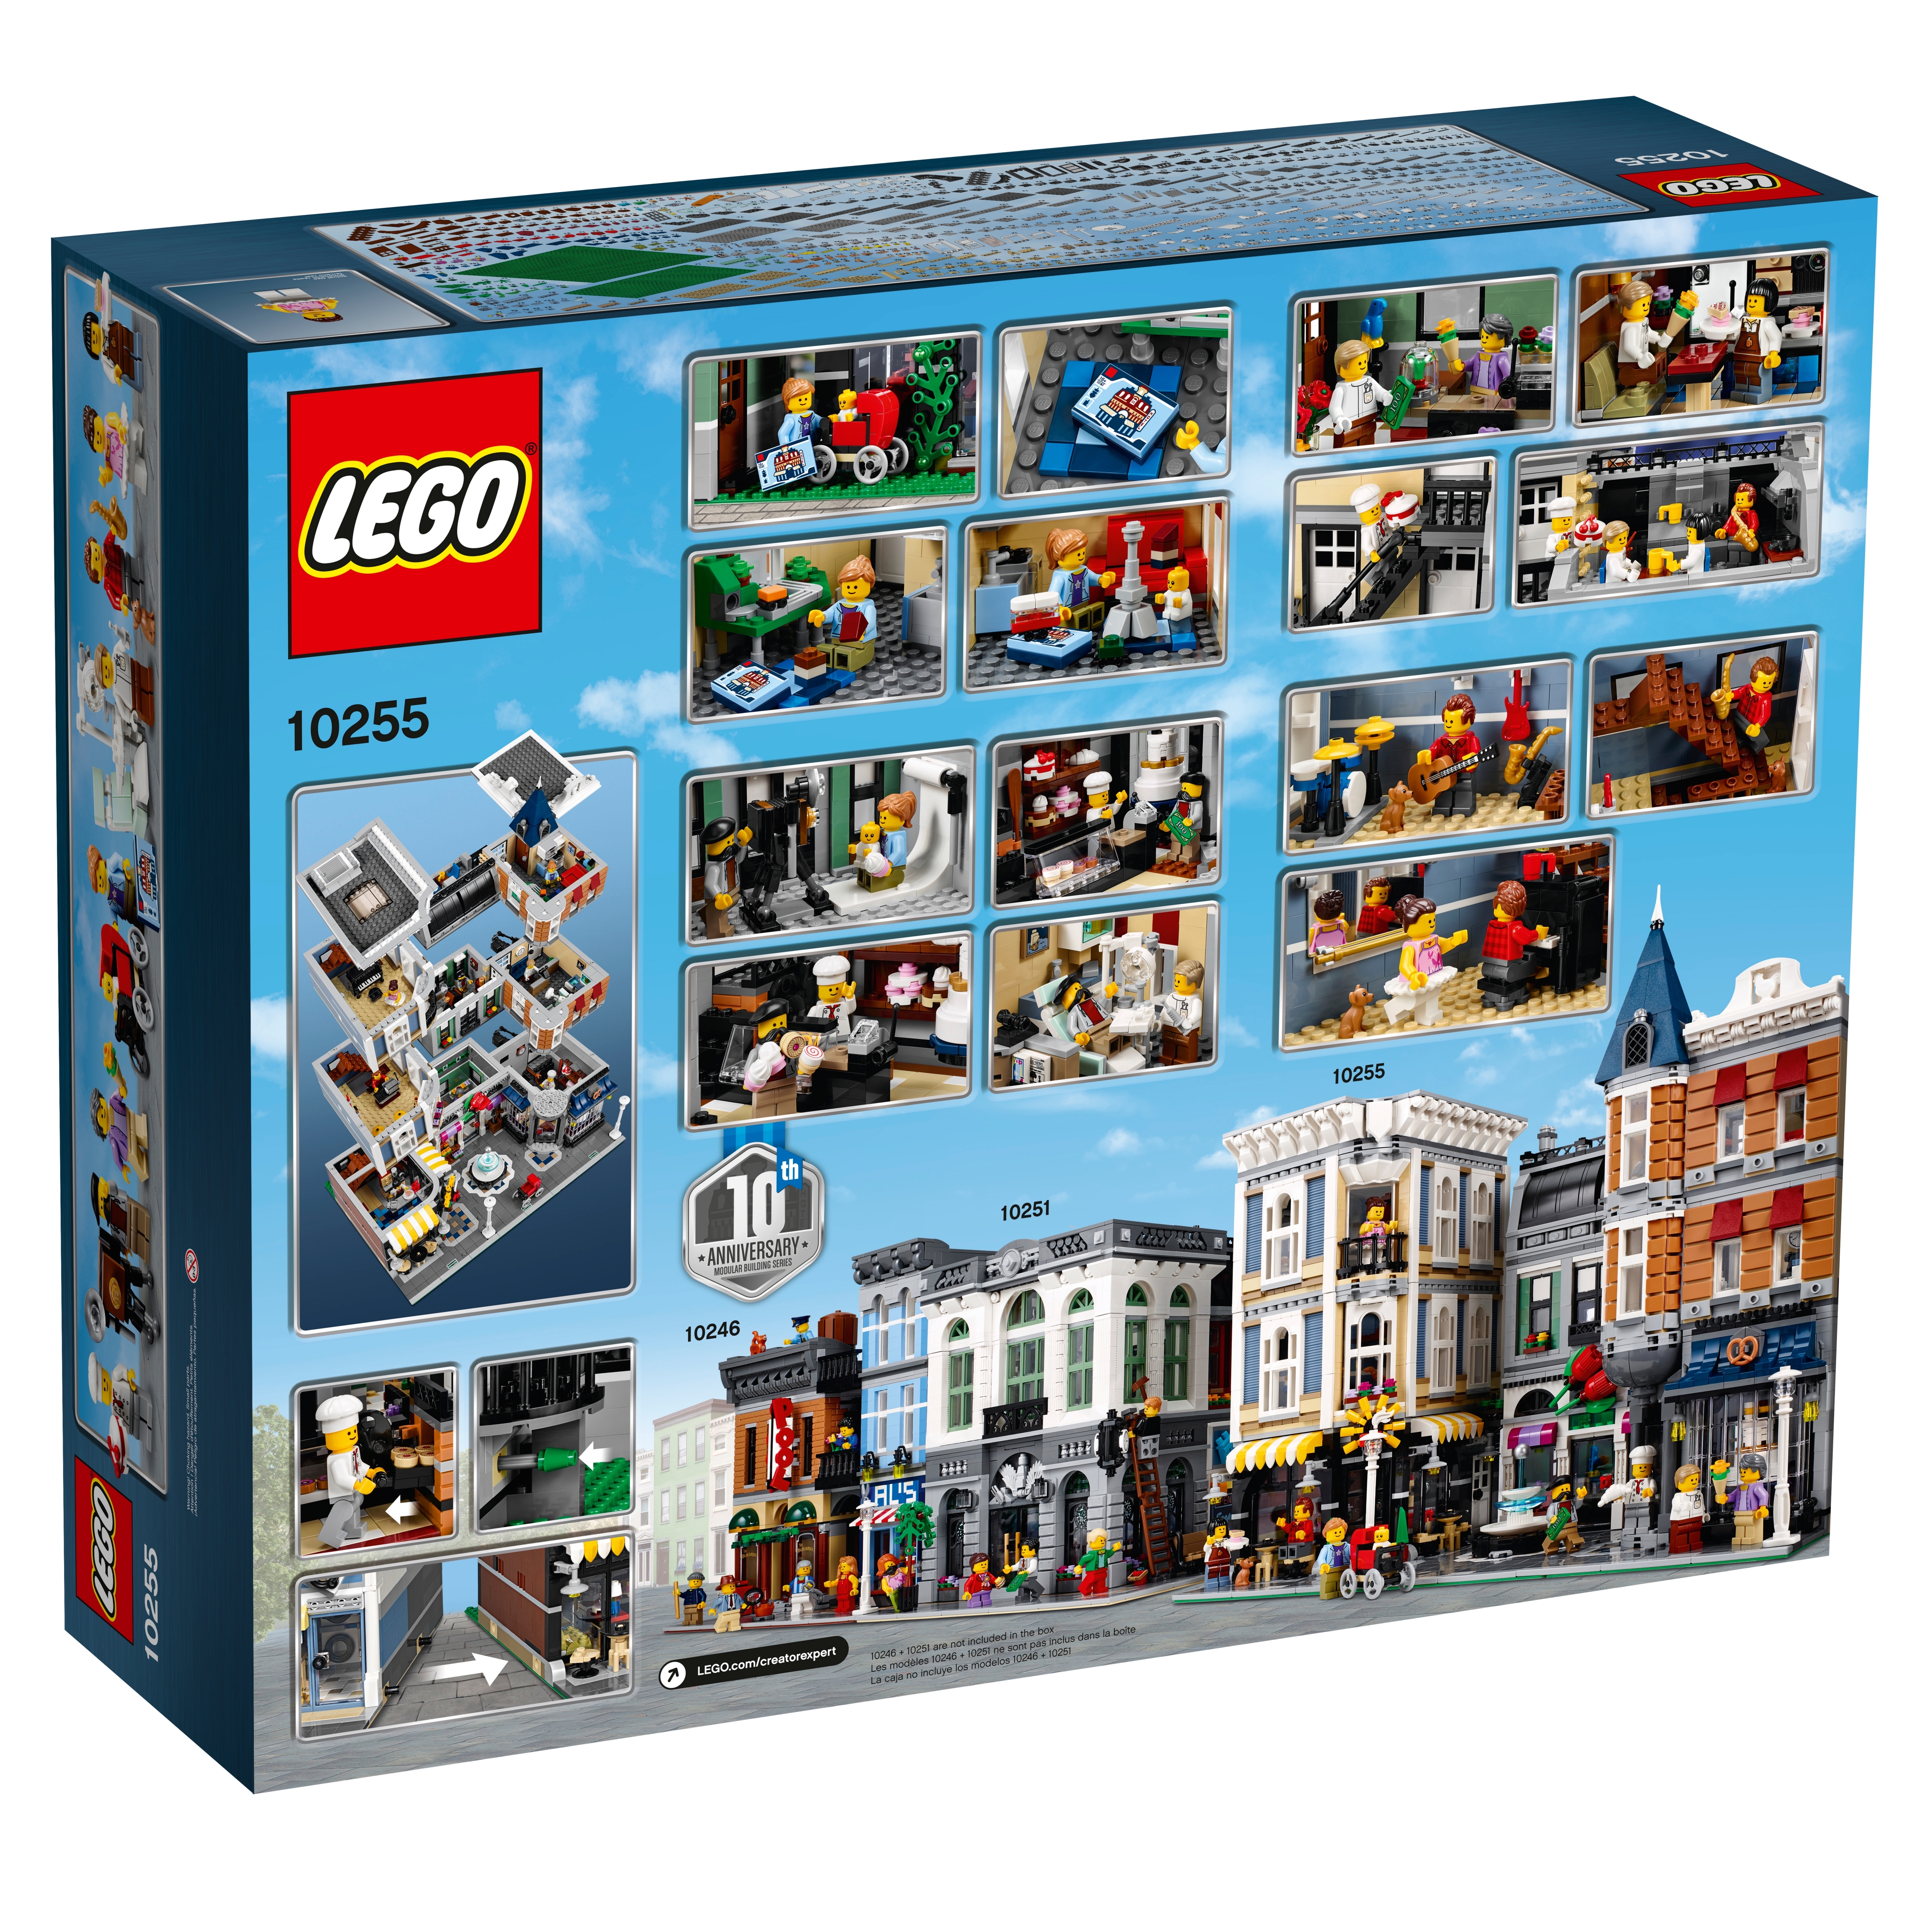 Assembly Square 10255 | Creator Expert | Buy online at the